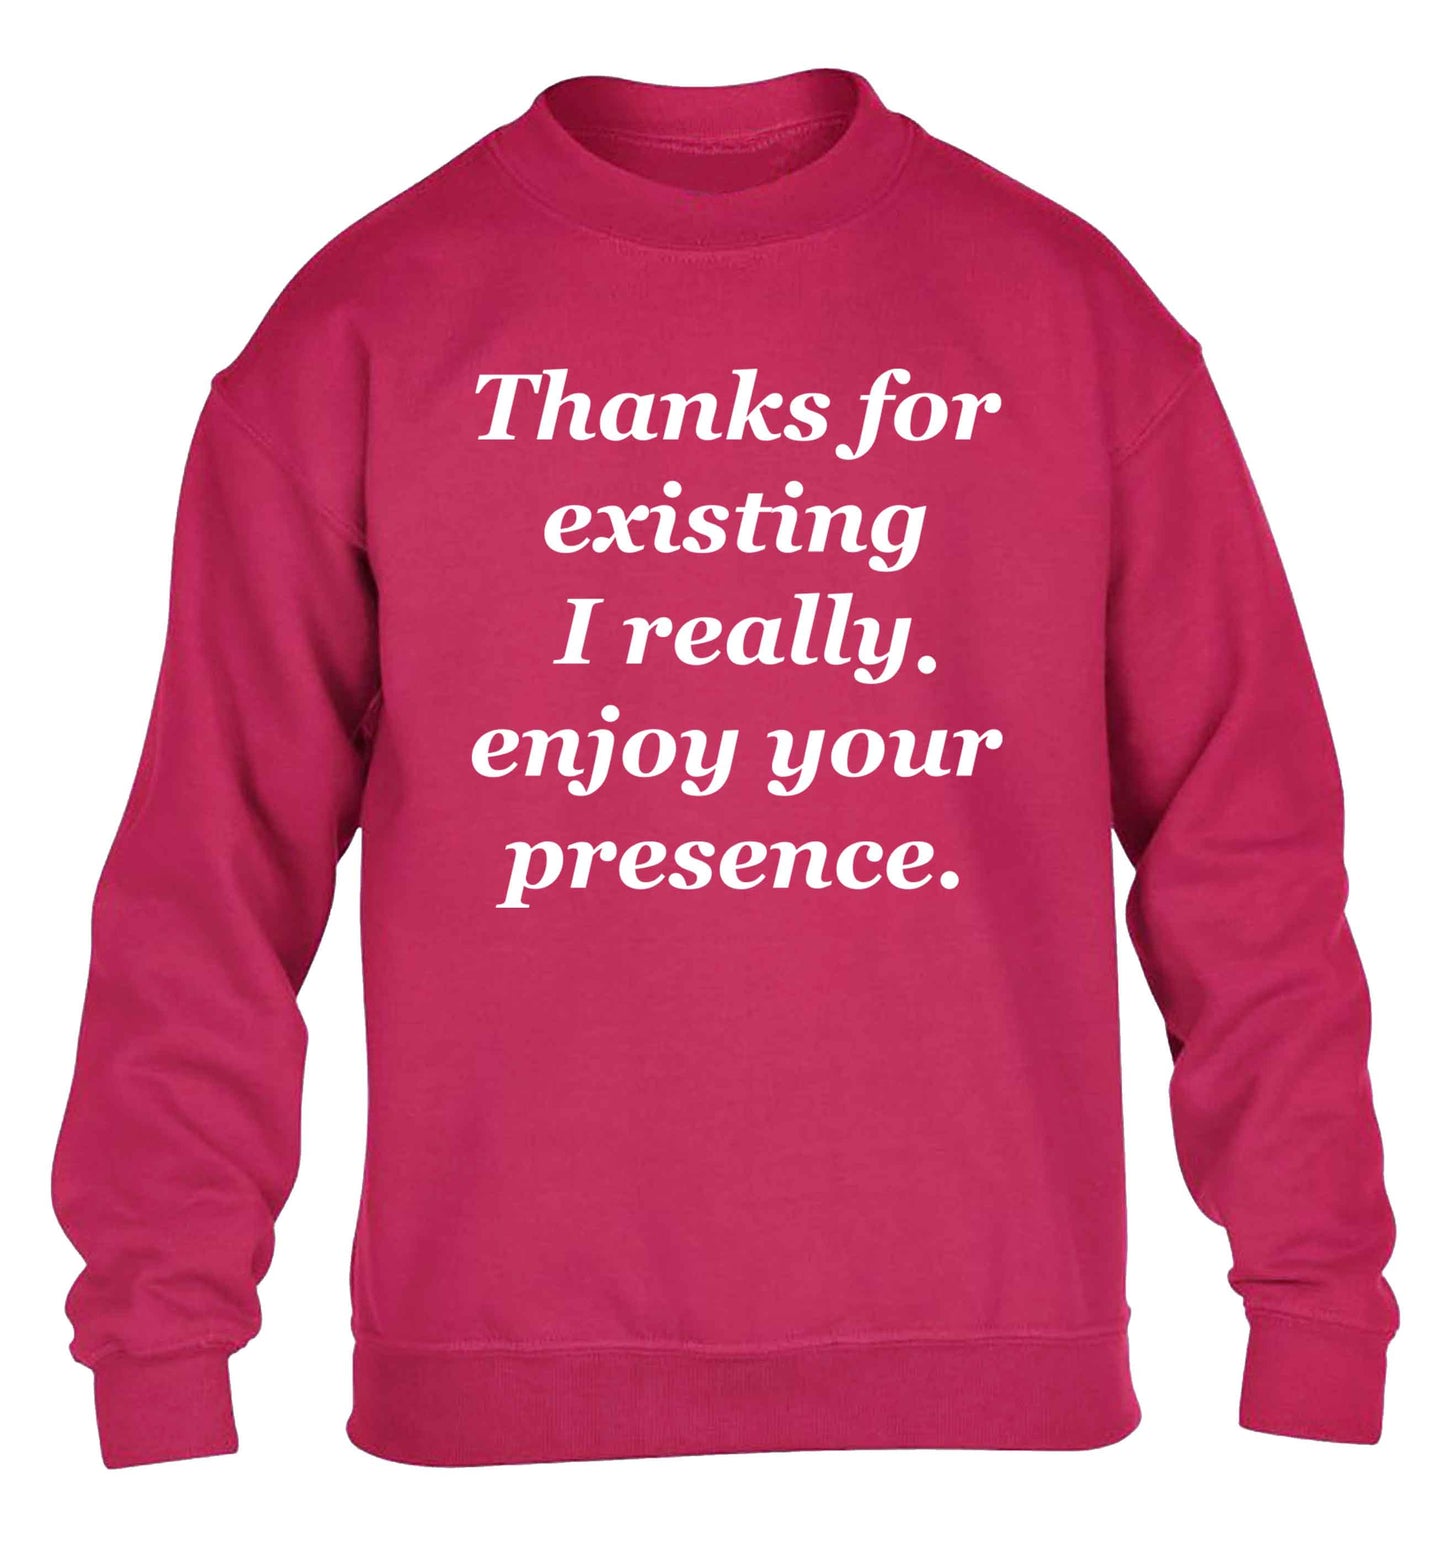 Thanks for existing I really enjoy your presence children's pink sweater 12-13 Years